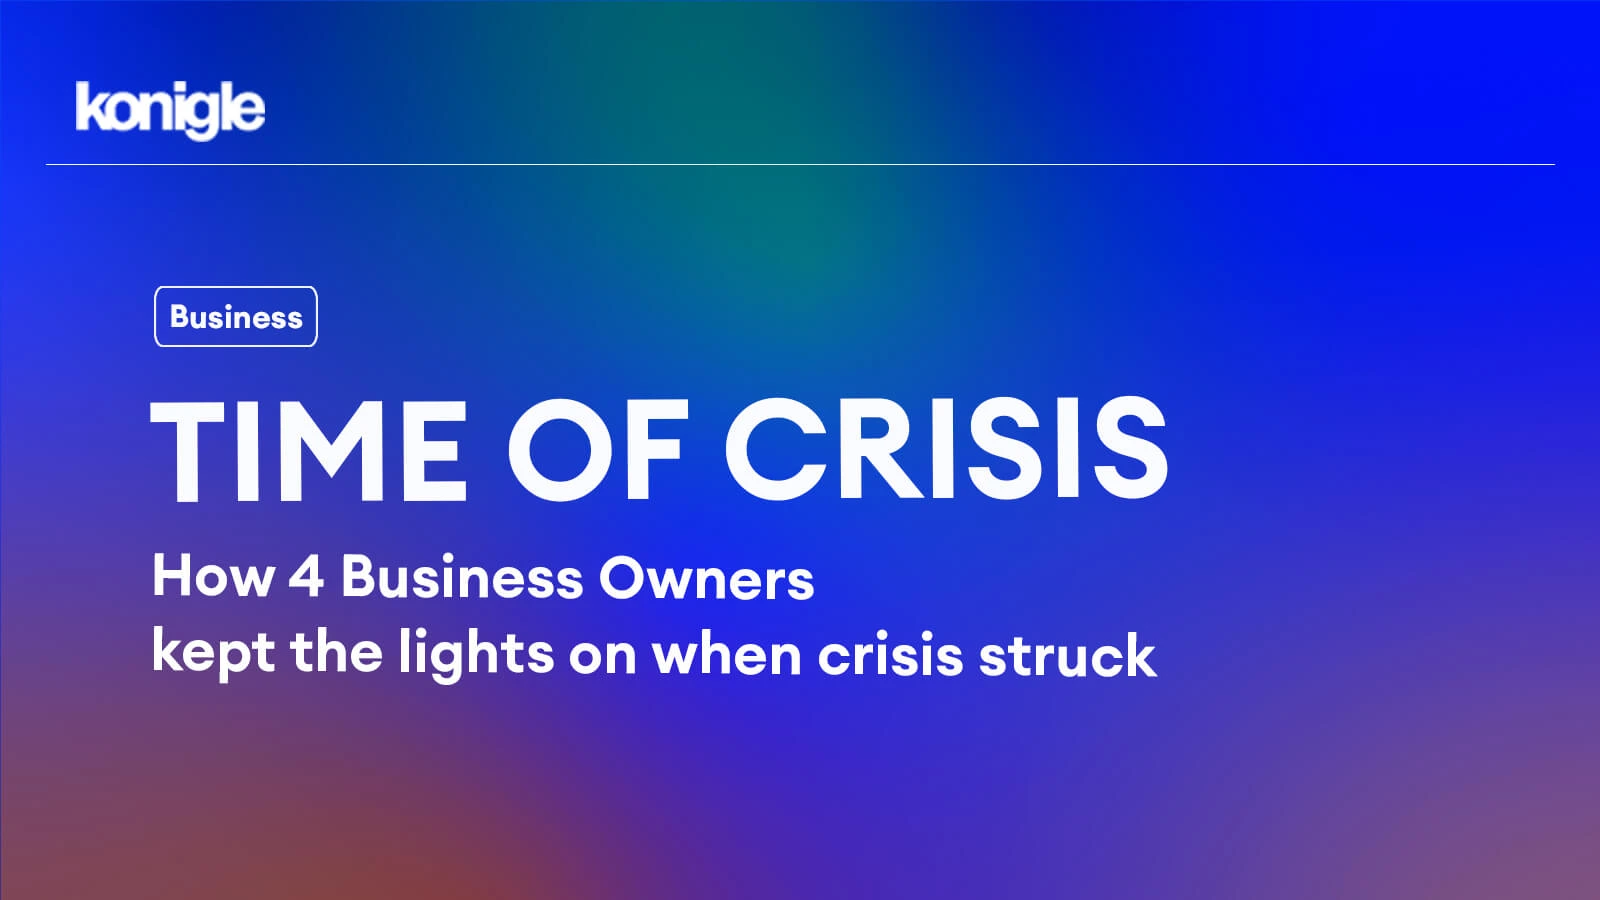 How 4 Business Owners kept the lights on when a crisis struck